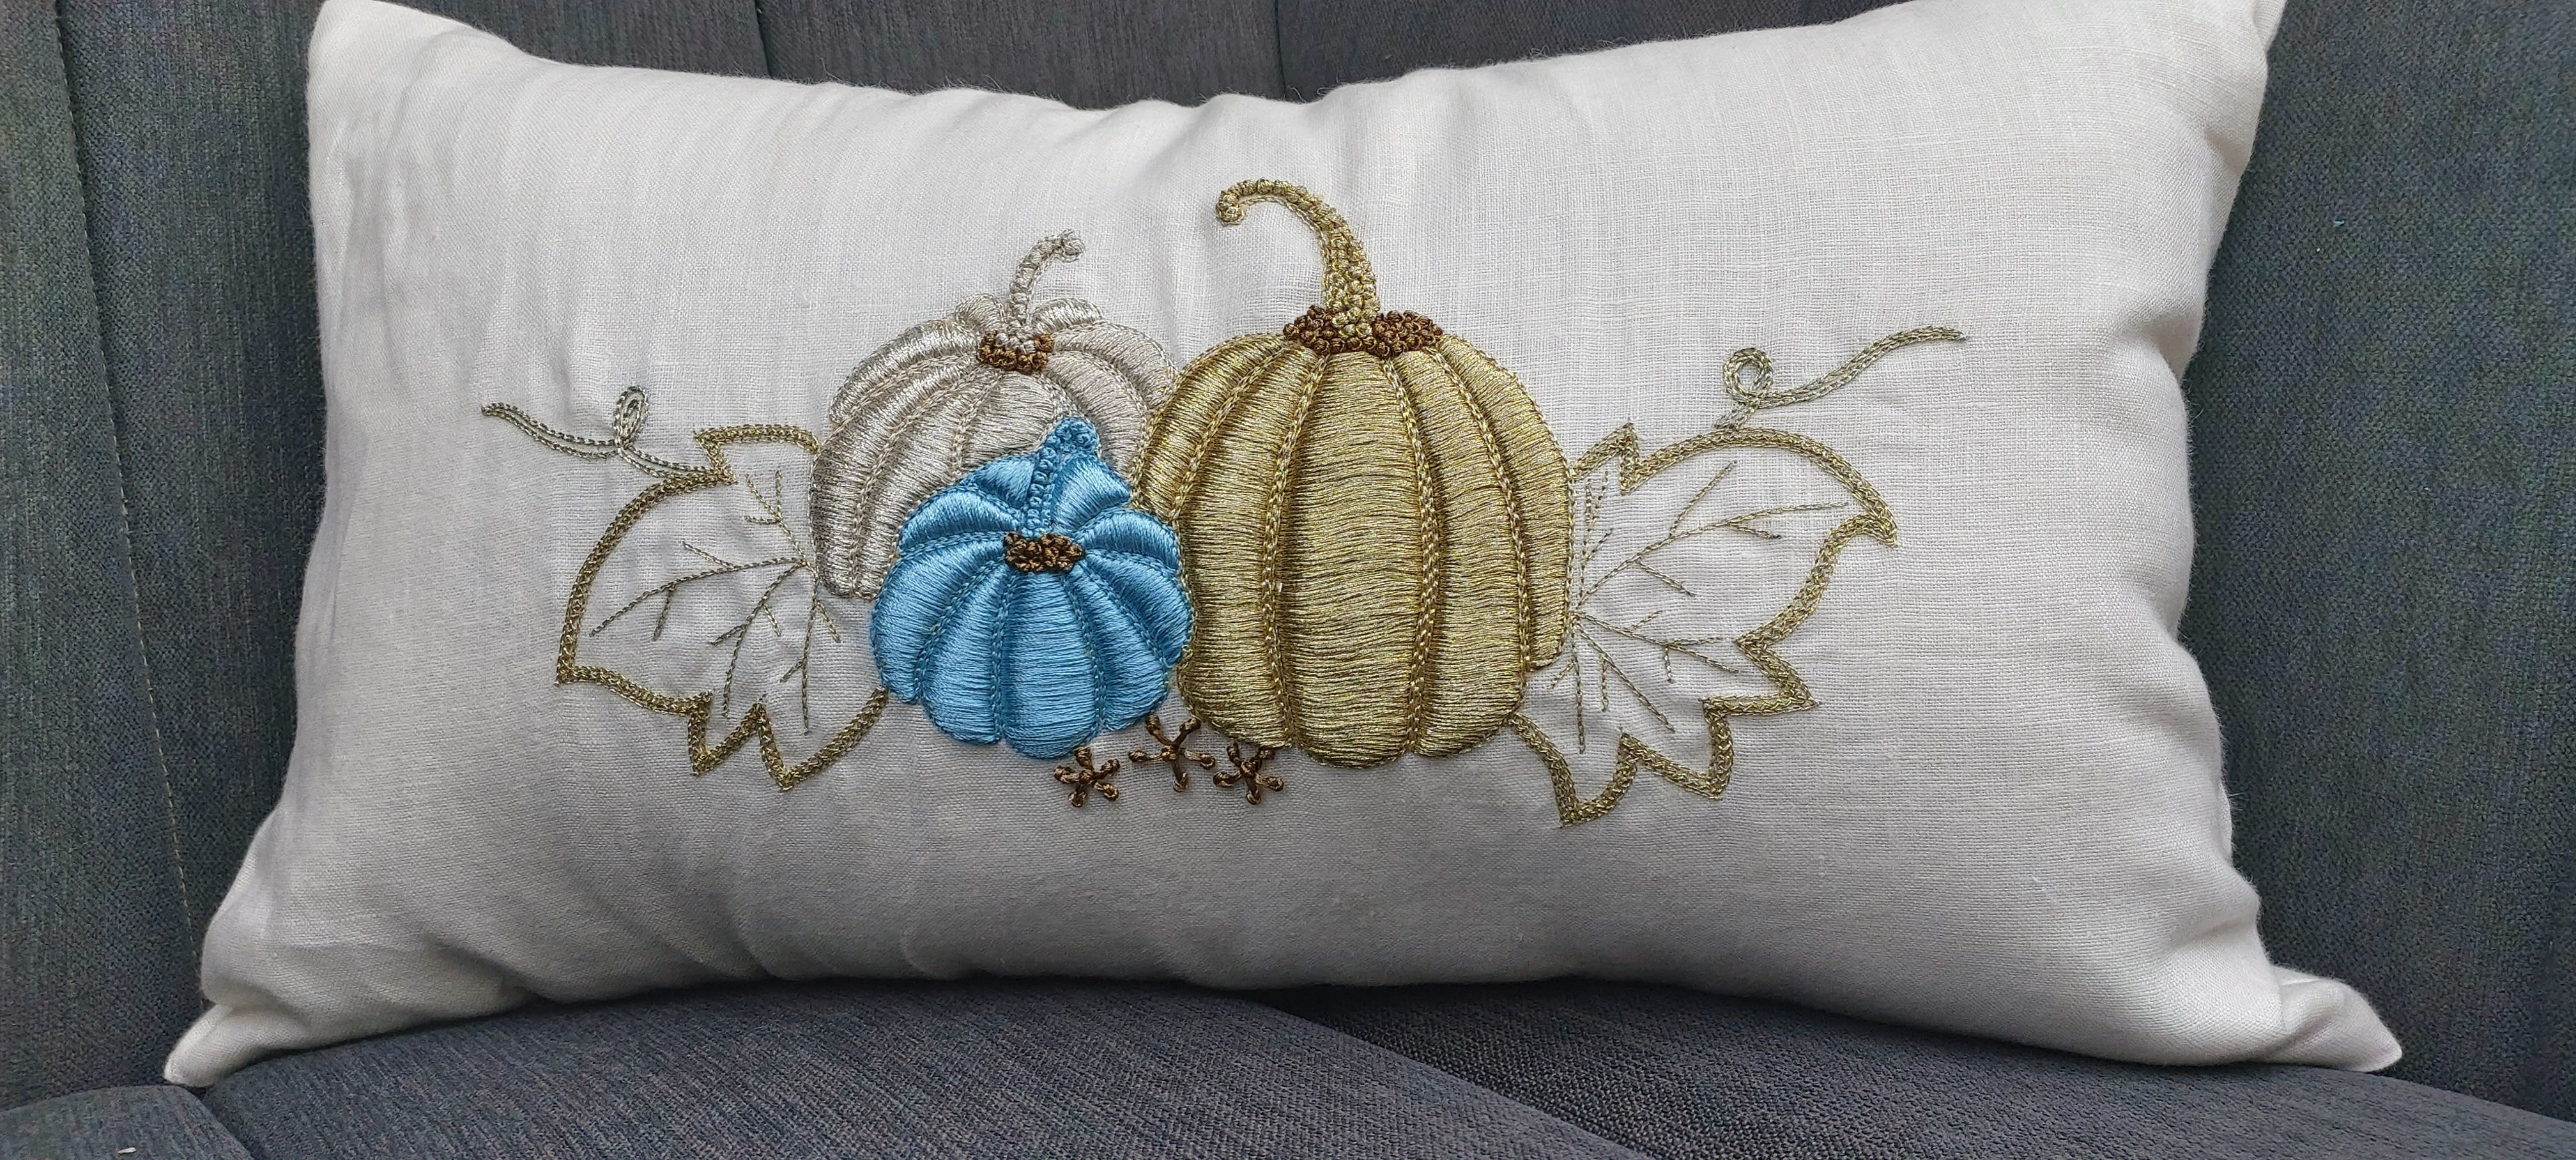 Amore Beaute Each pumpkin is carefully hand embroidered using different techniques to create a soft textural effect.